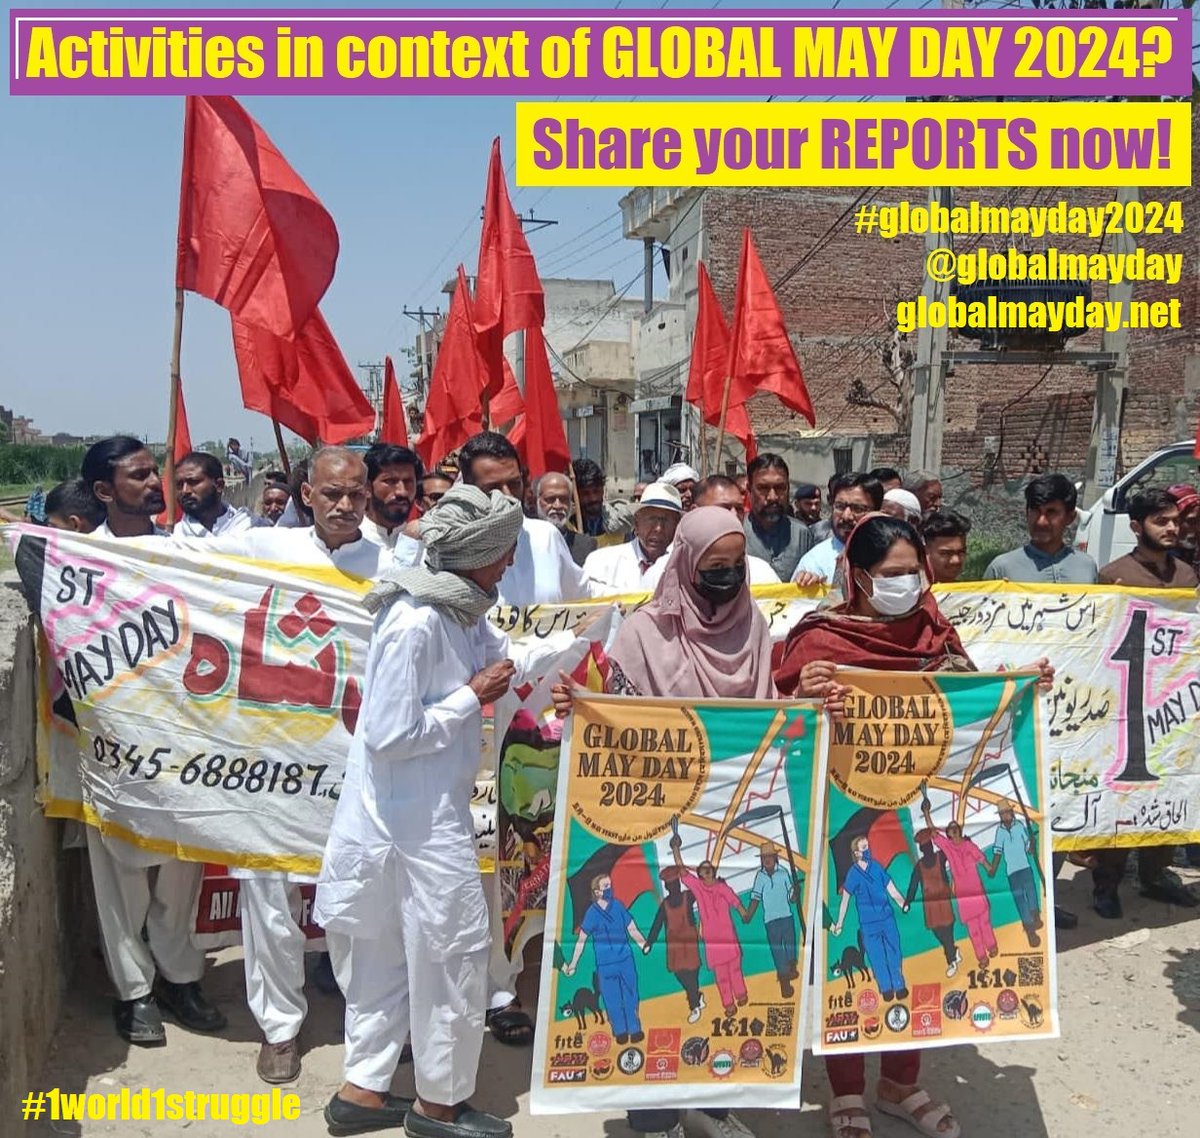 Submit your reports of actions in context of #globalmayday2024 now, so they can be added to the website and communicated internationally: globalmayday.net/gmd2024/report…

#1world1struggle